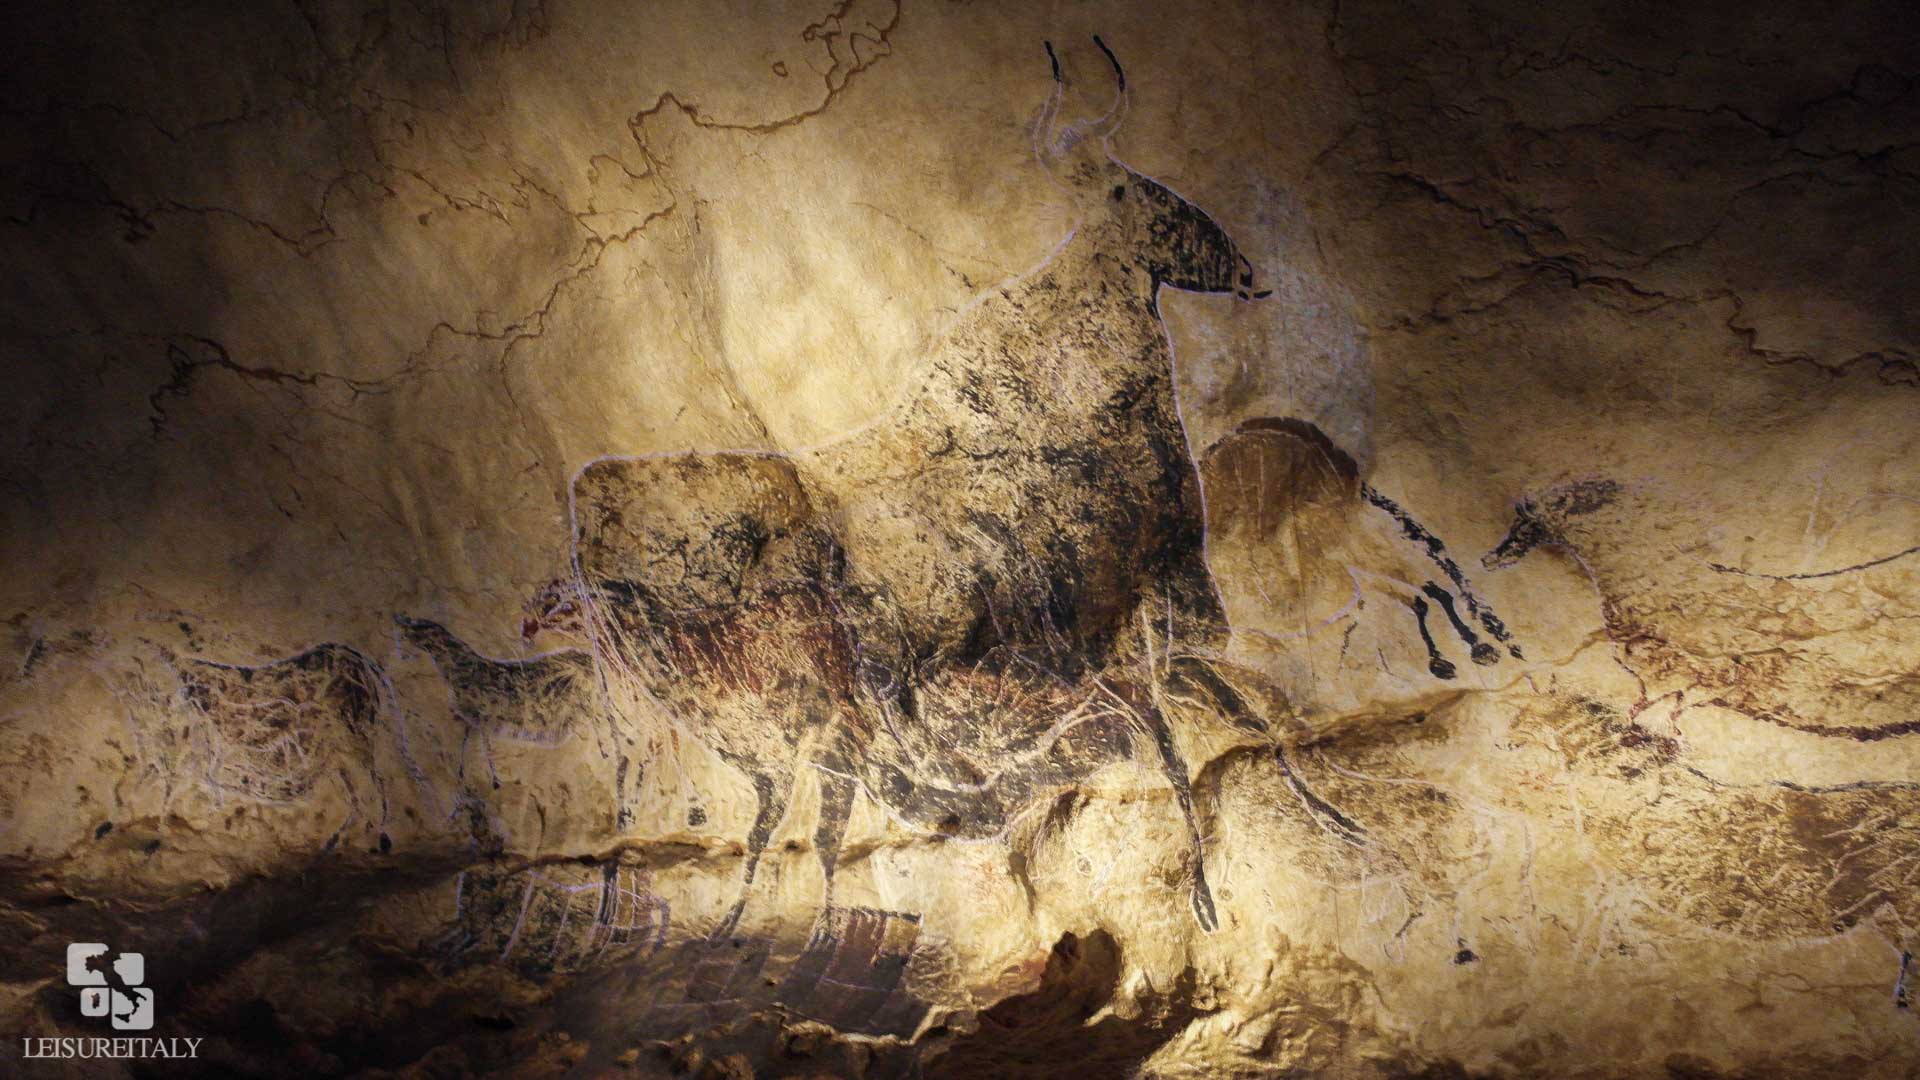 Reproduction of paintings on the cave